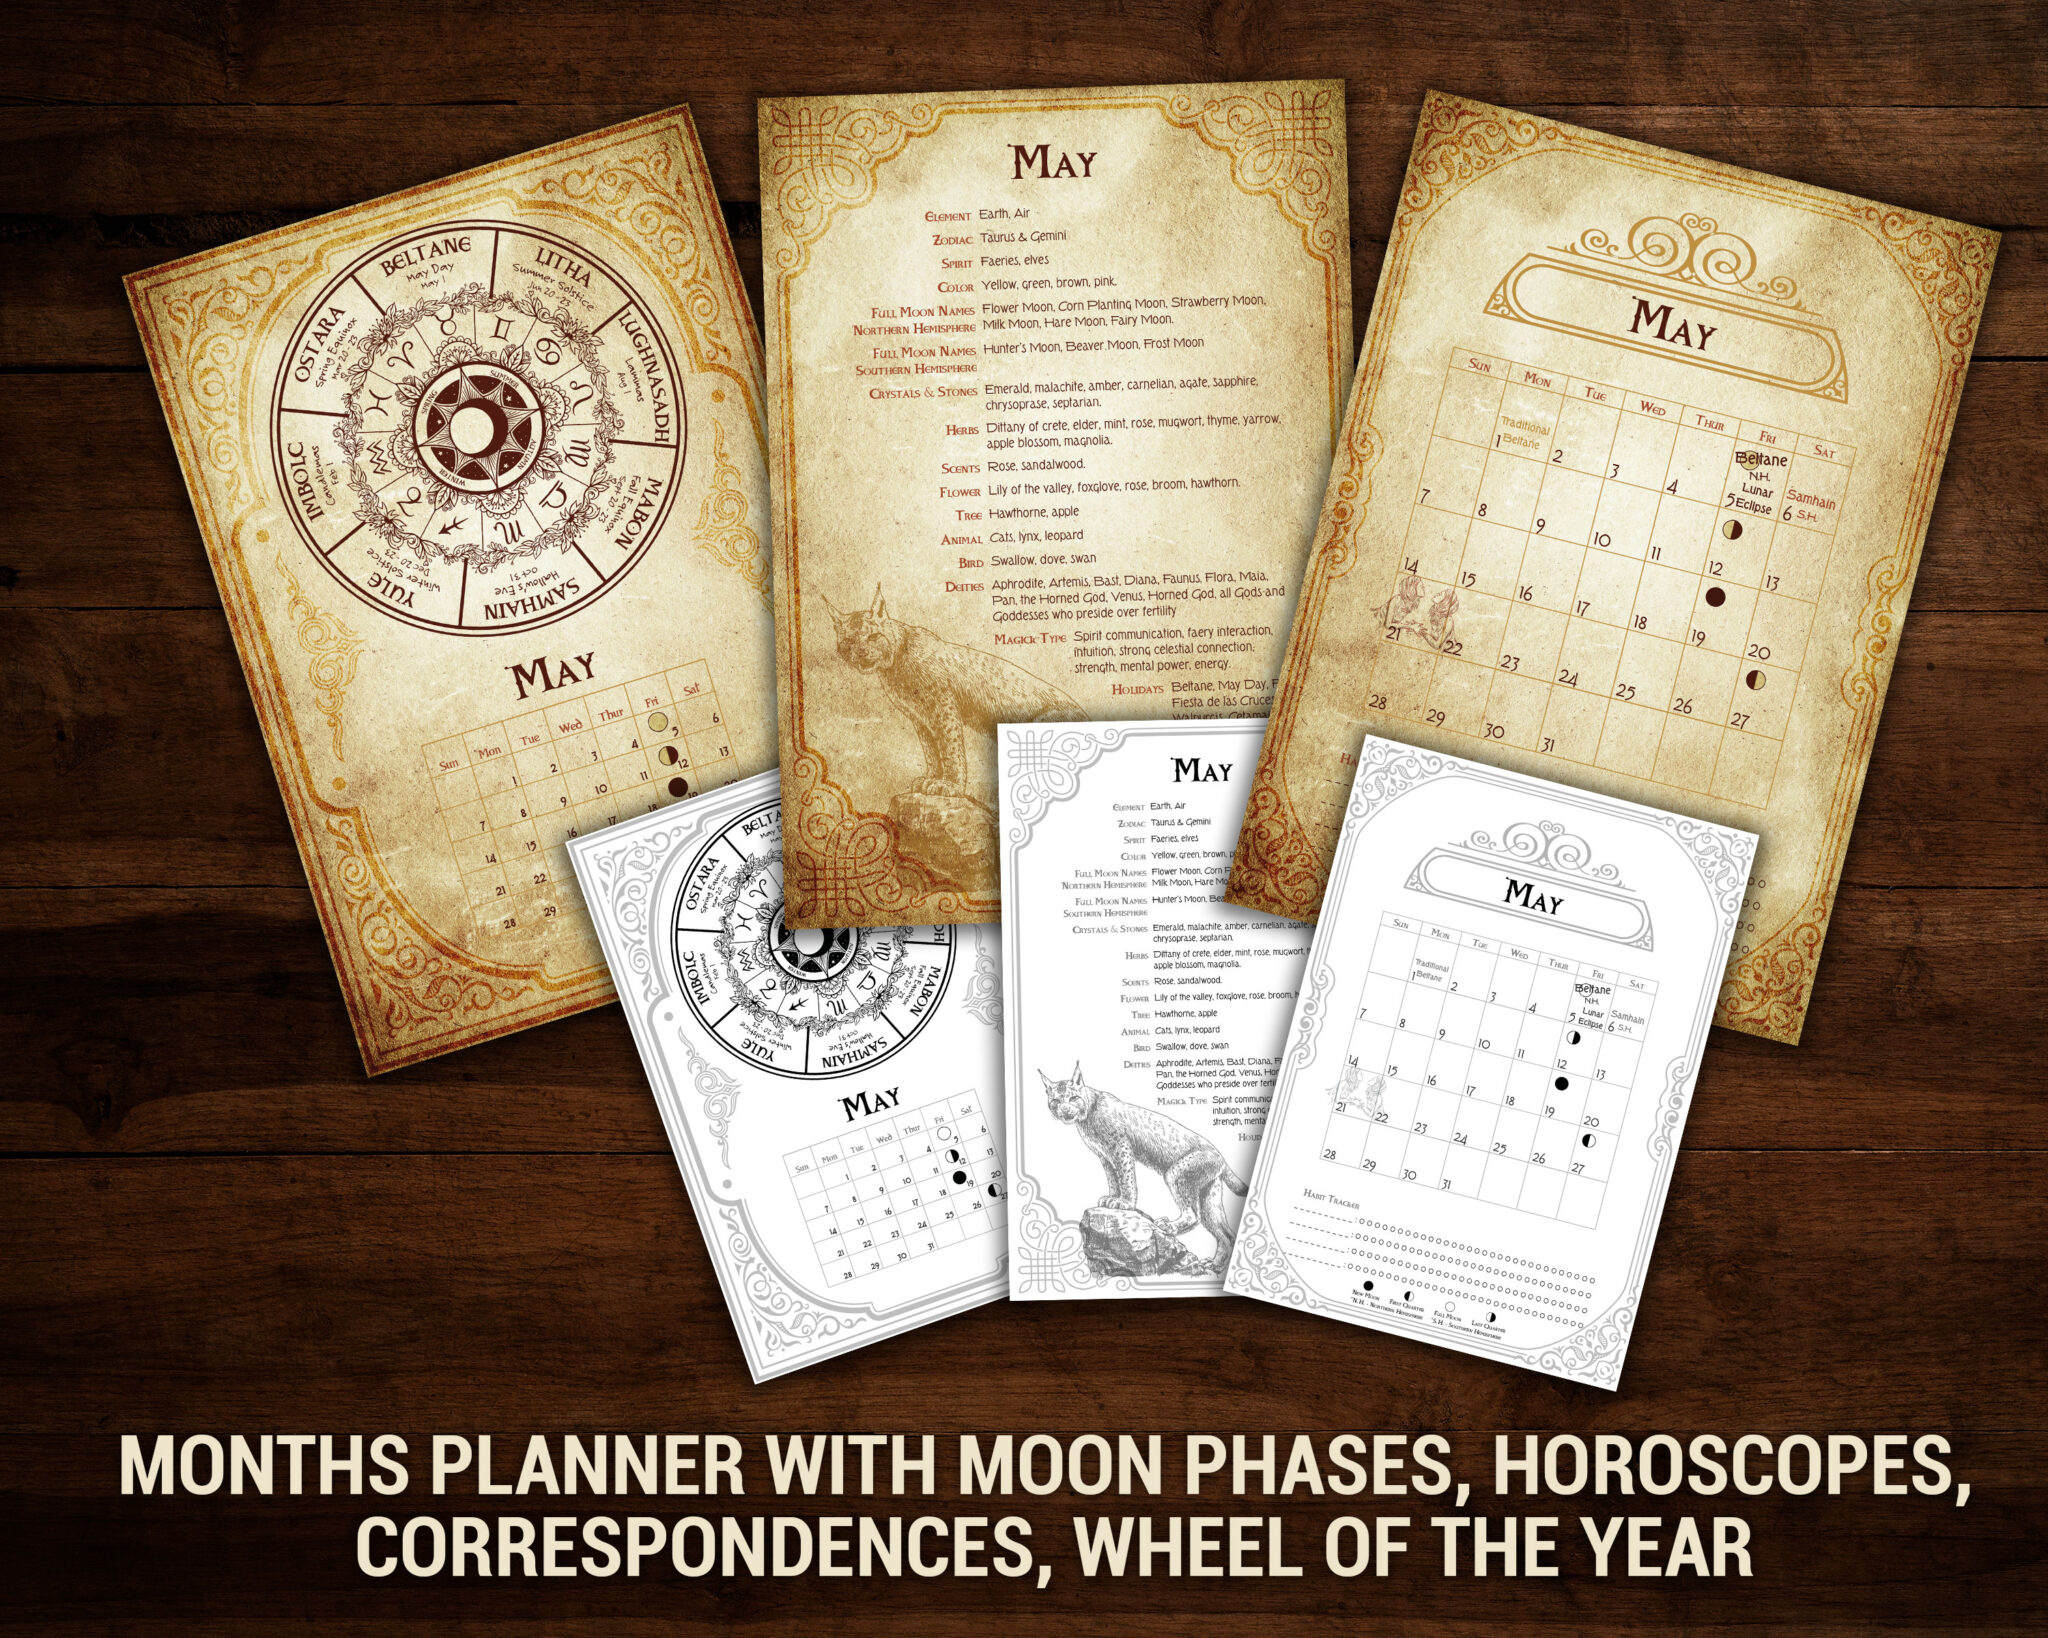 Wheel of the Year Monthly Correspondences, Moon phases, horoscopes, and monthly planner